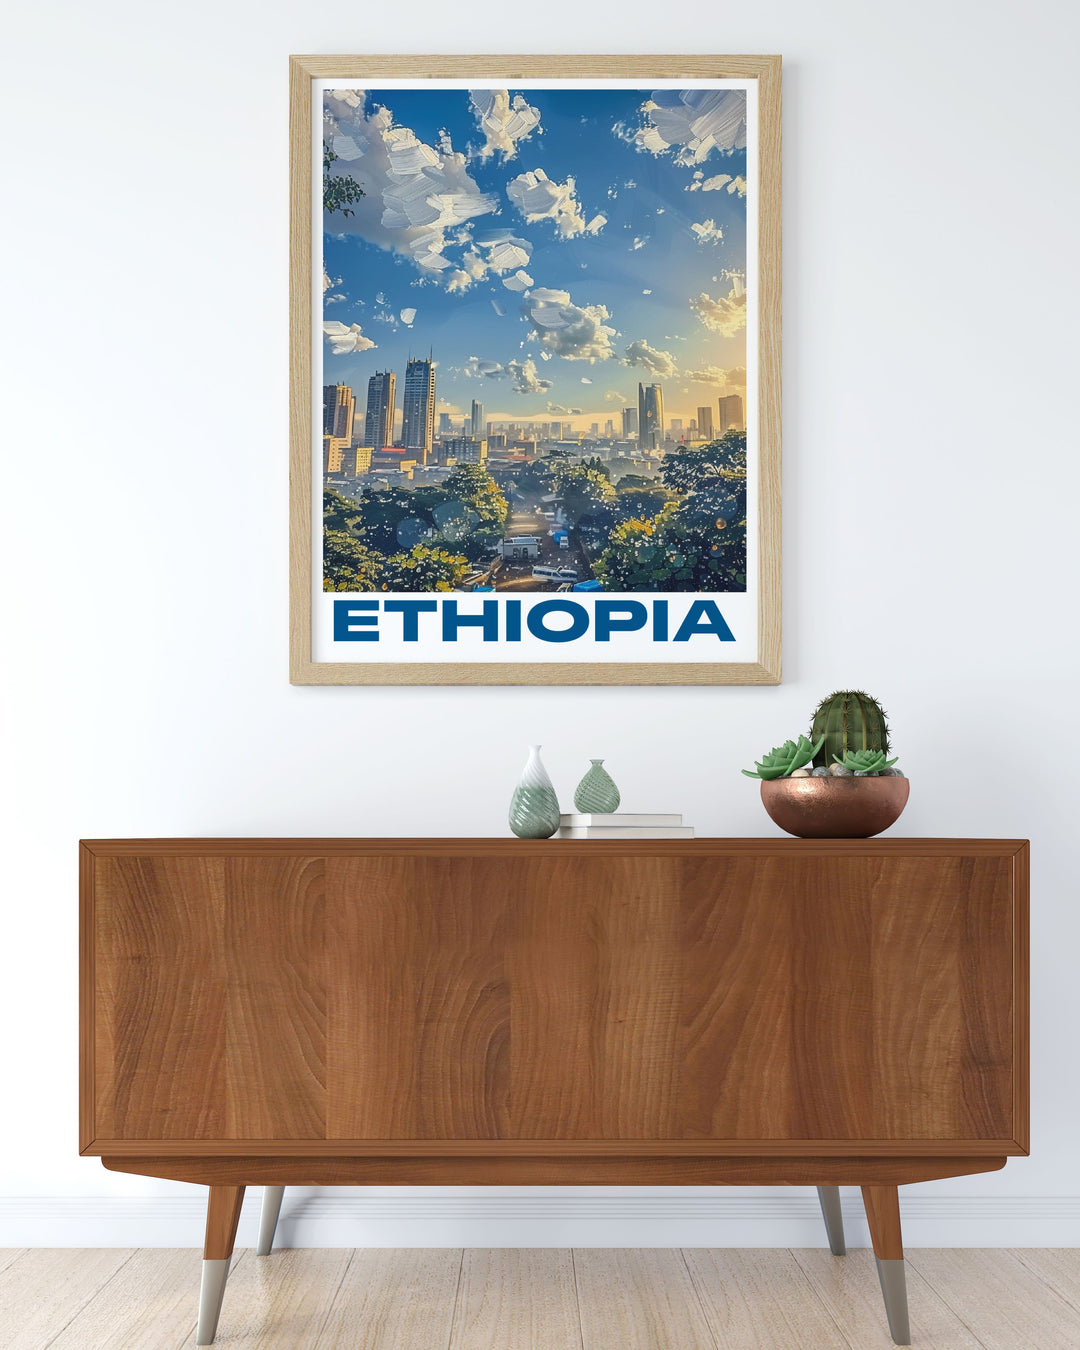 Ethiopia Art Print of Addis Ababa's vibrant streets and architectural beauty offering a stunning reminder of Ethiopian culture and a striking statement piece that celebrates the essence of Ethiopia